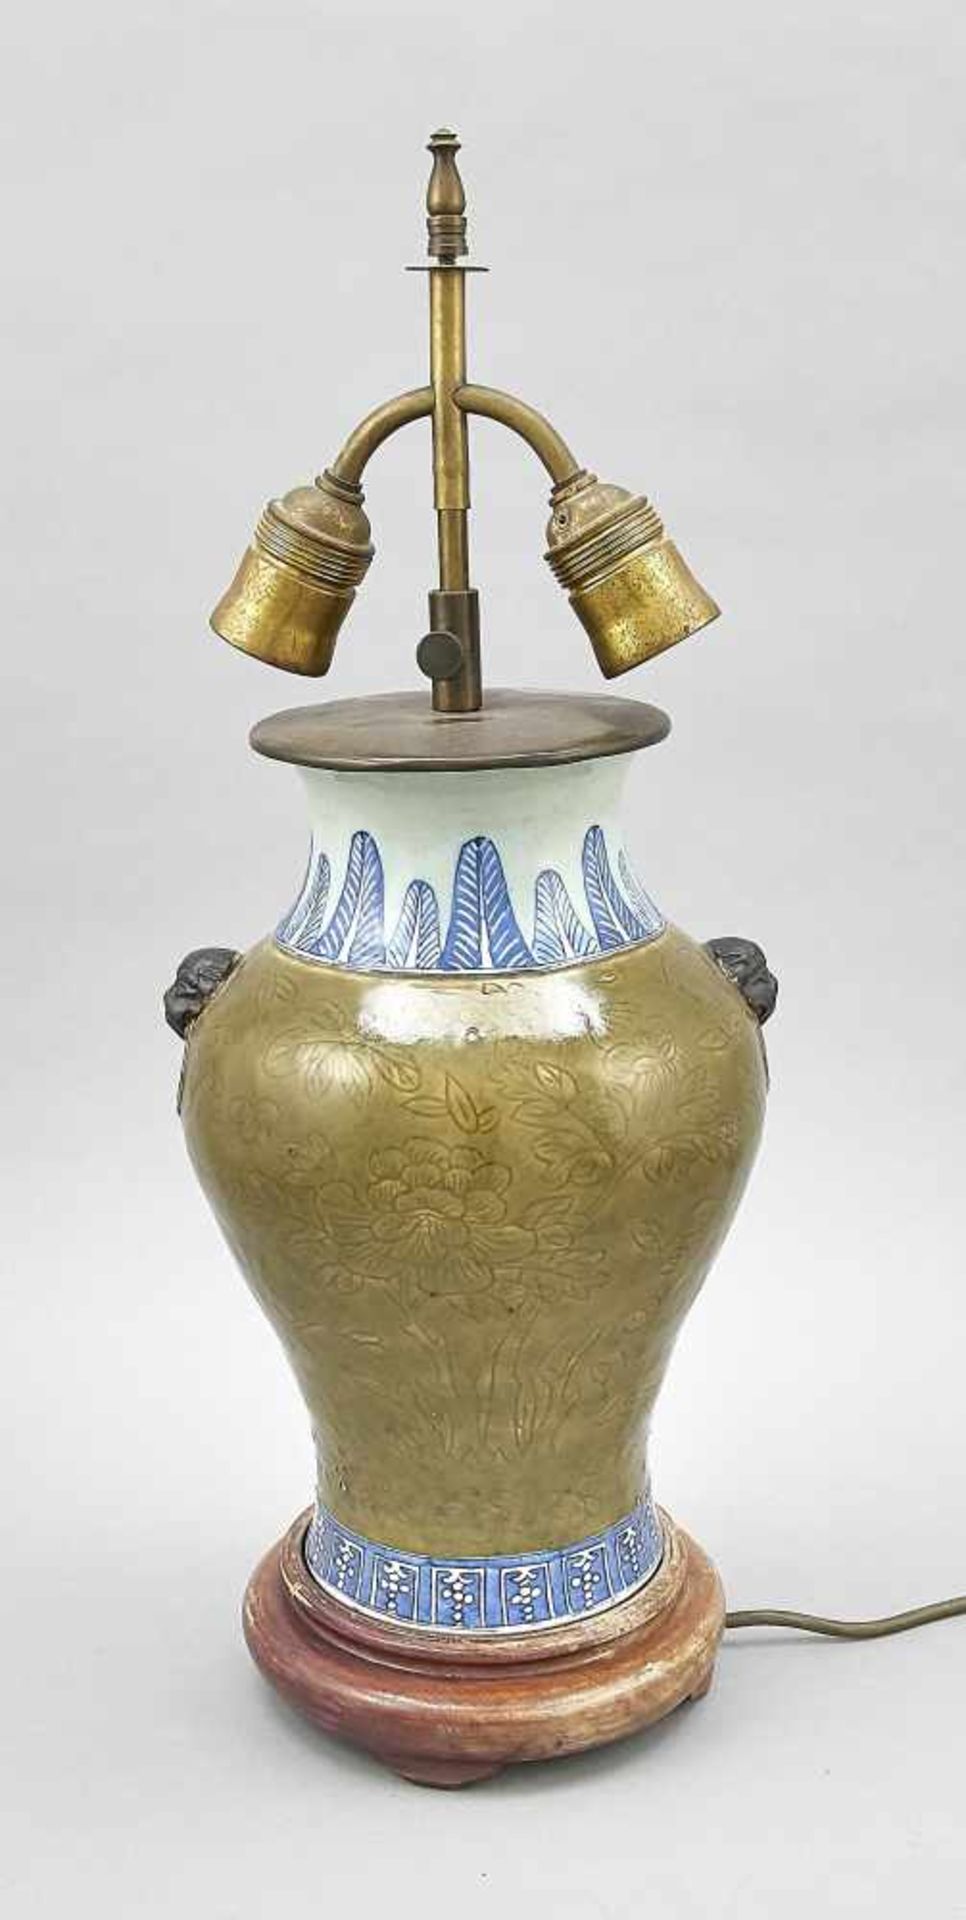 Vase mounted as a lamp base. Vase: China, 19th century, with carved peony decoration on an